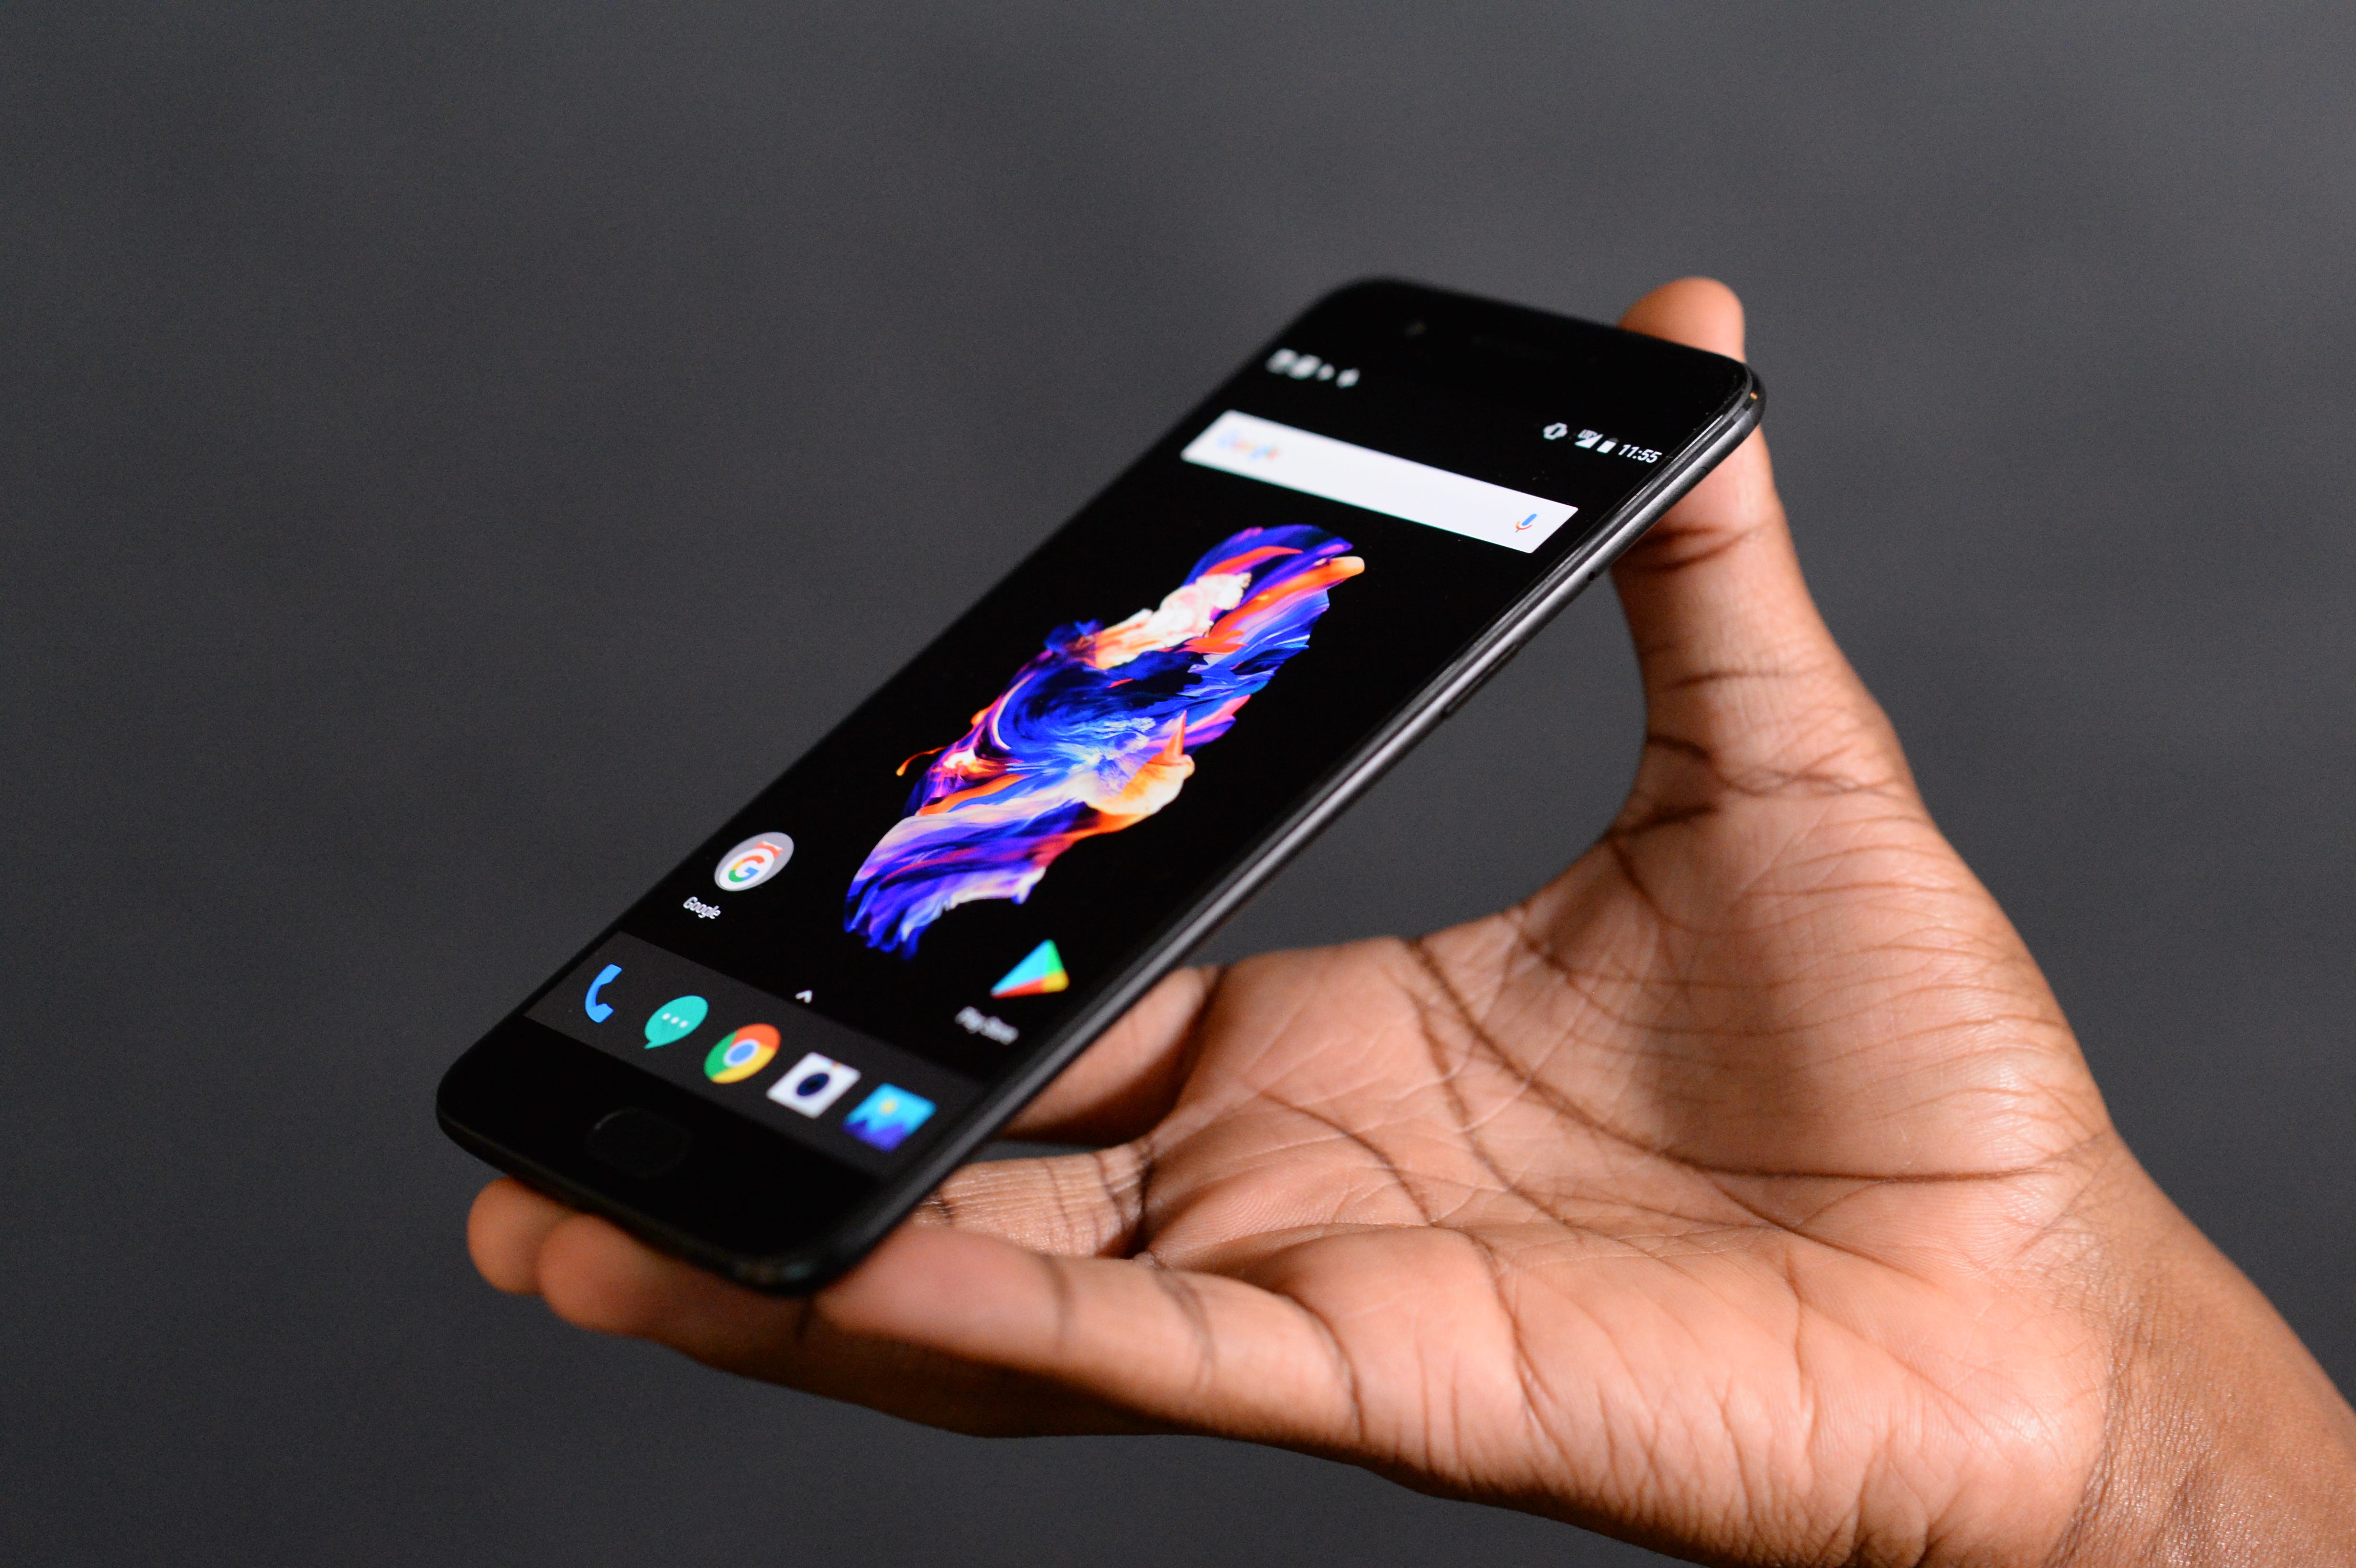 iPhone rival OnePlus 5 brings sleek refinements, but not perfection